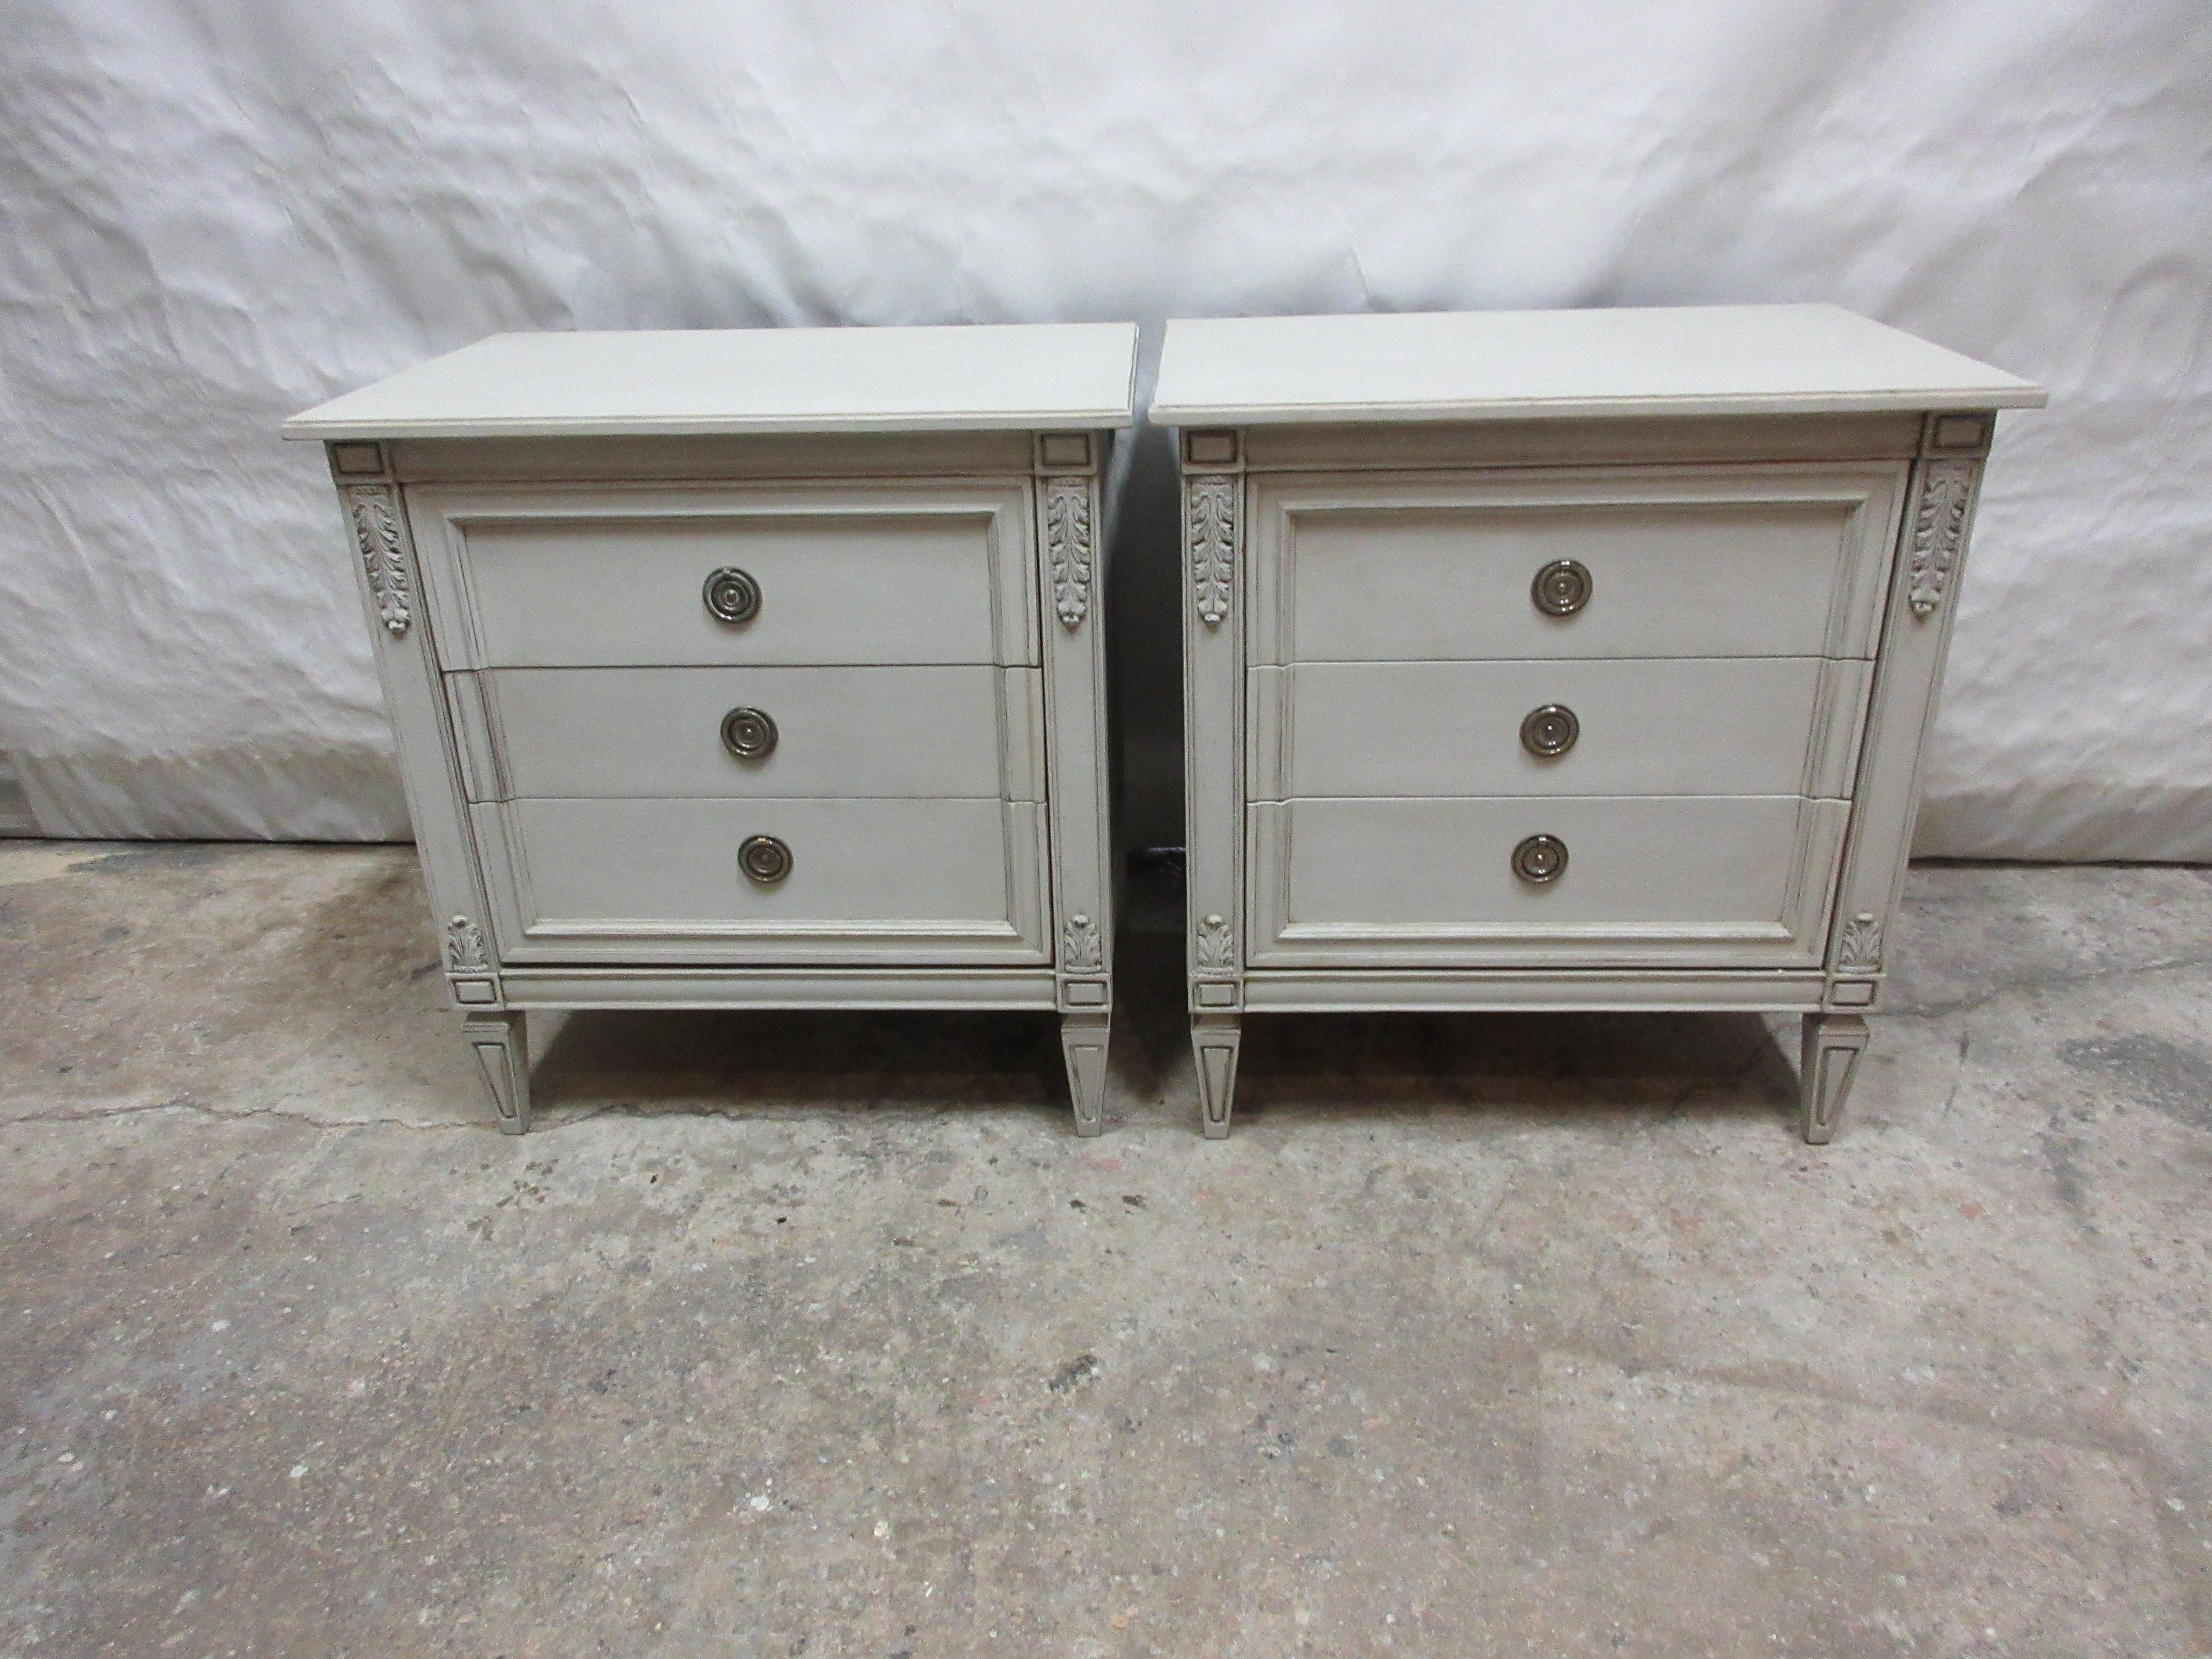 This is a unique set of 2 Swedish Gustavian Style Chest Of Drawers. They have been restored and repainted with Milk paints 